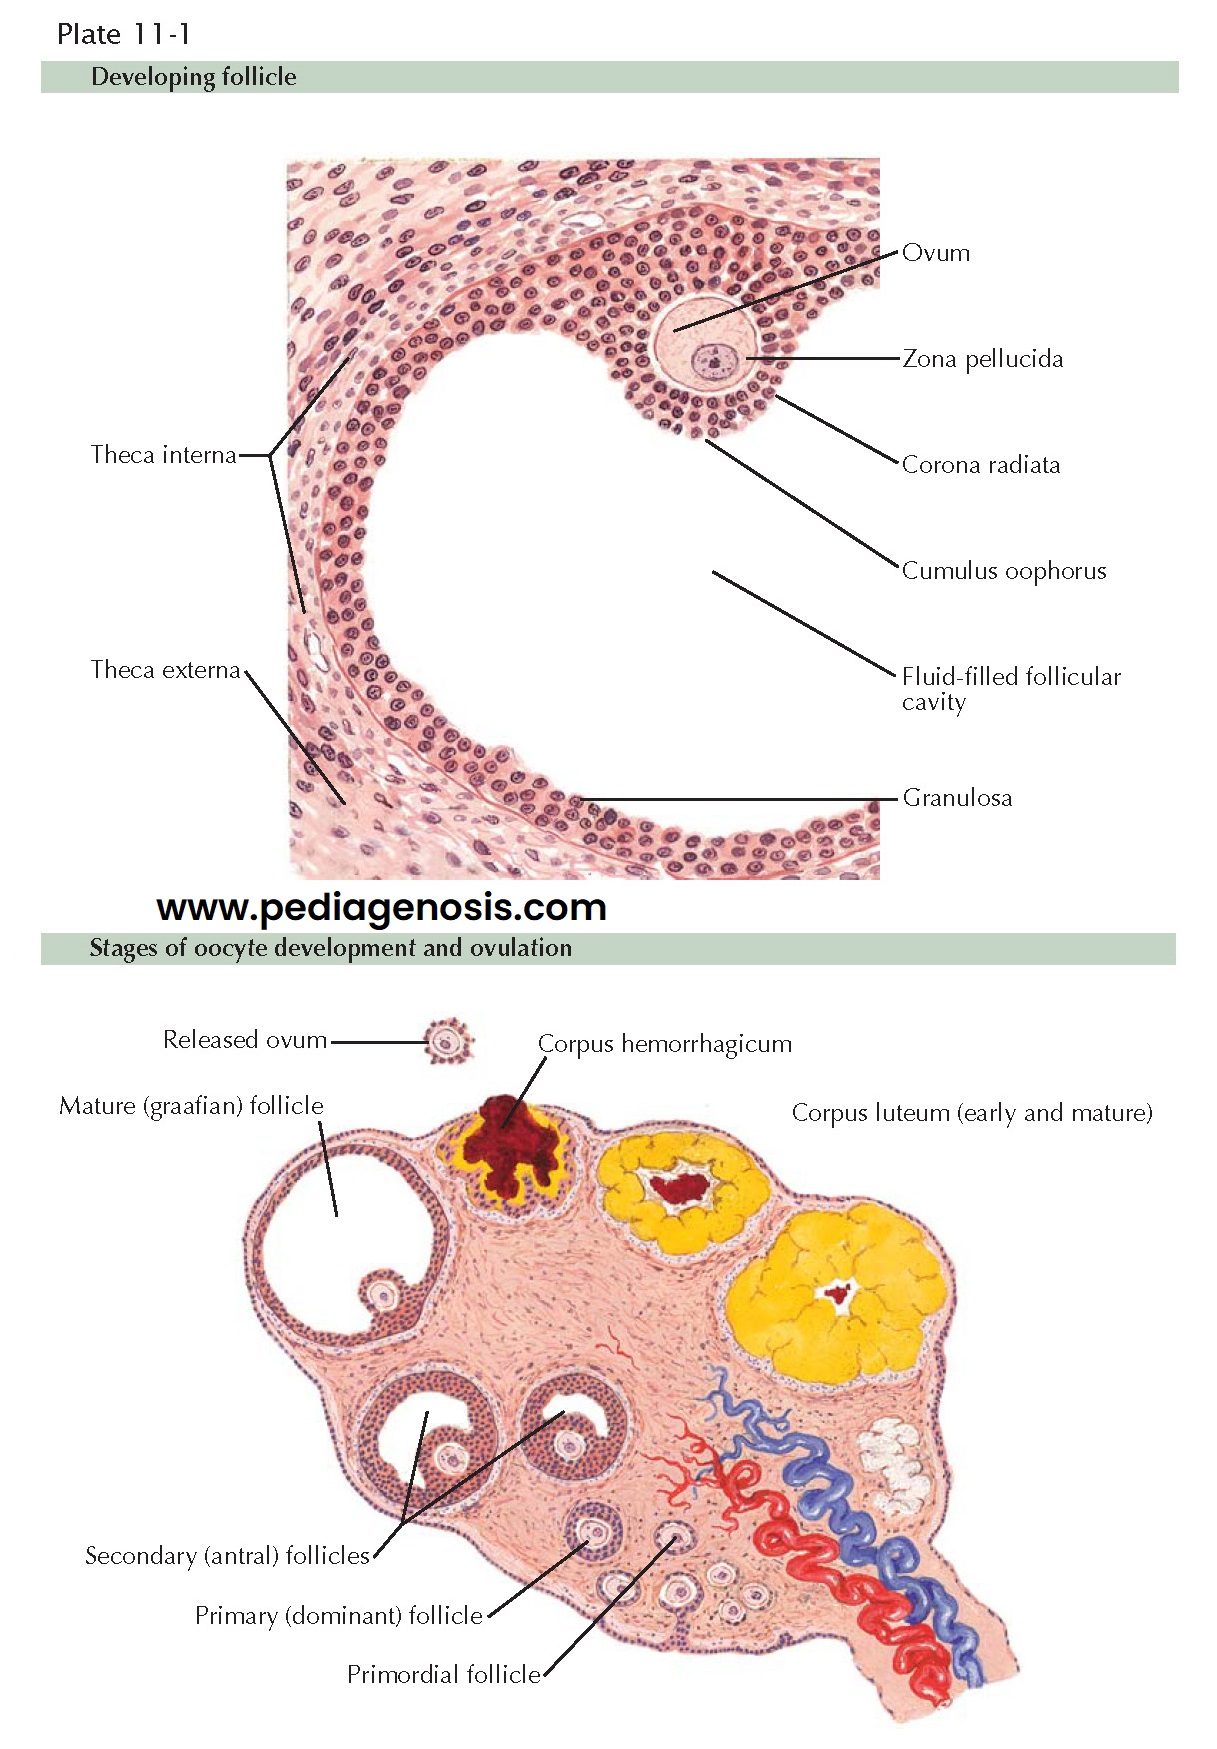 THE OOCYTE AND OVULATION